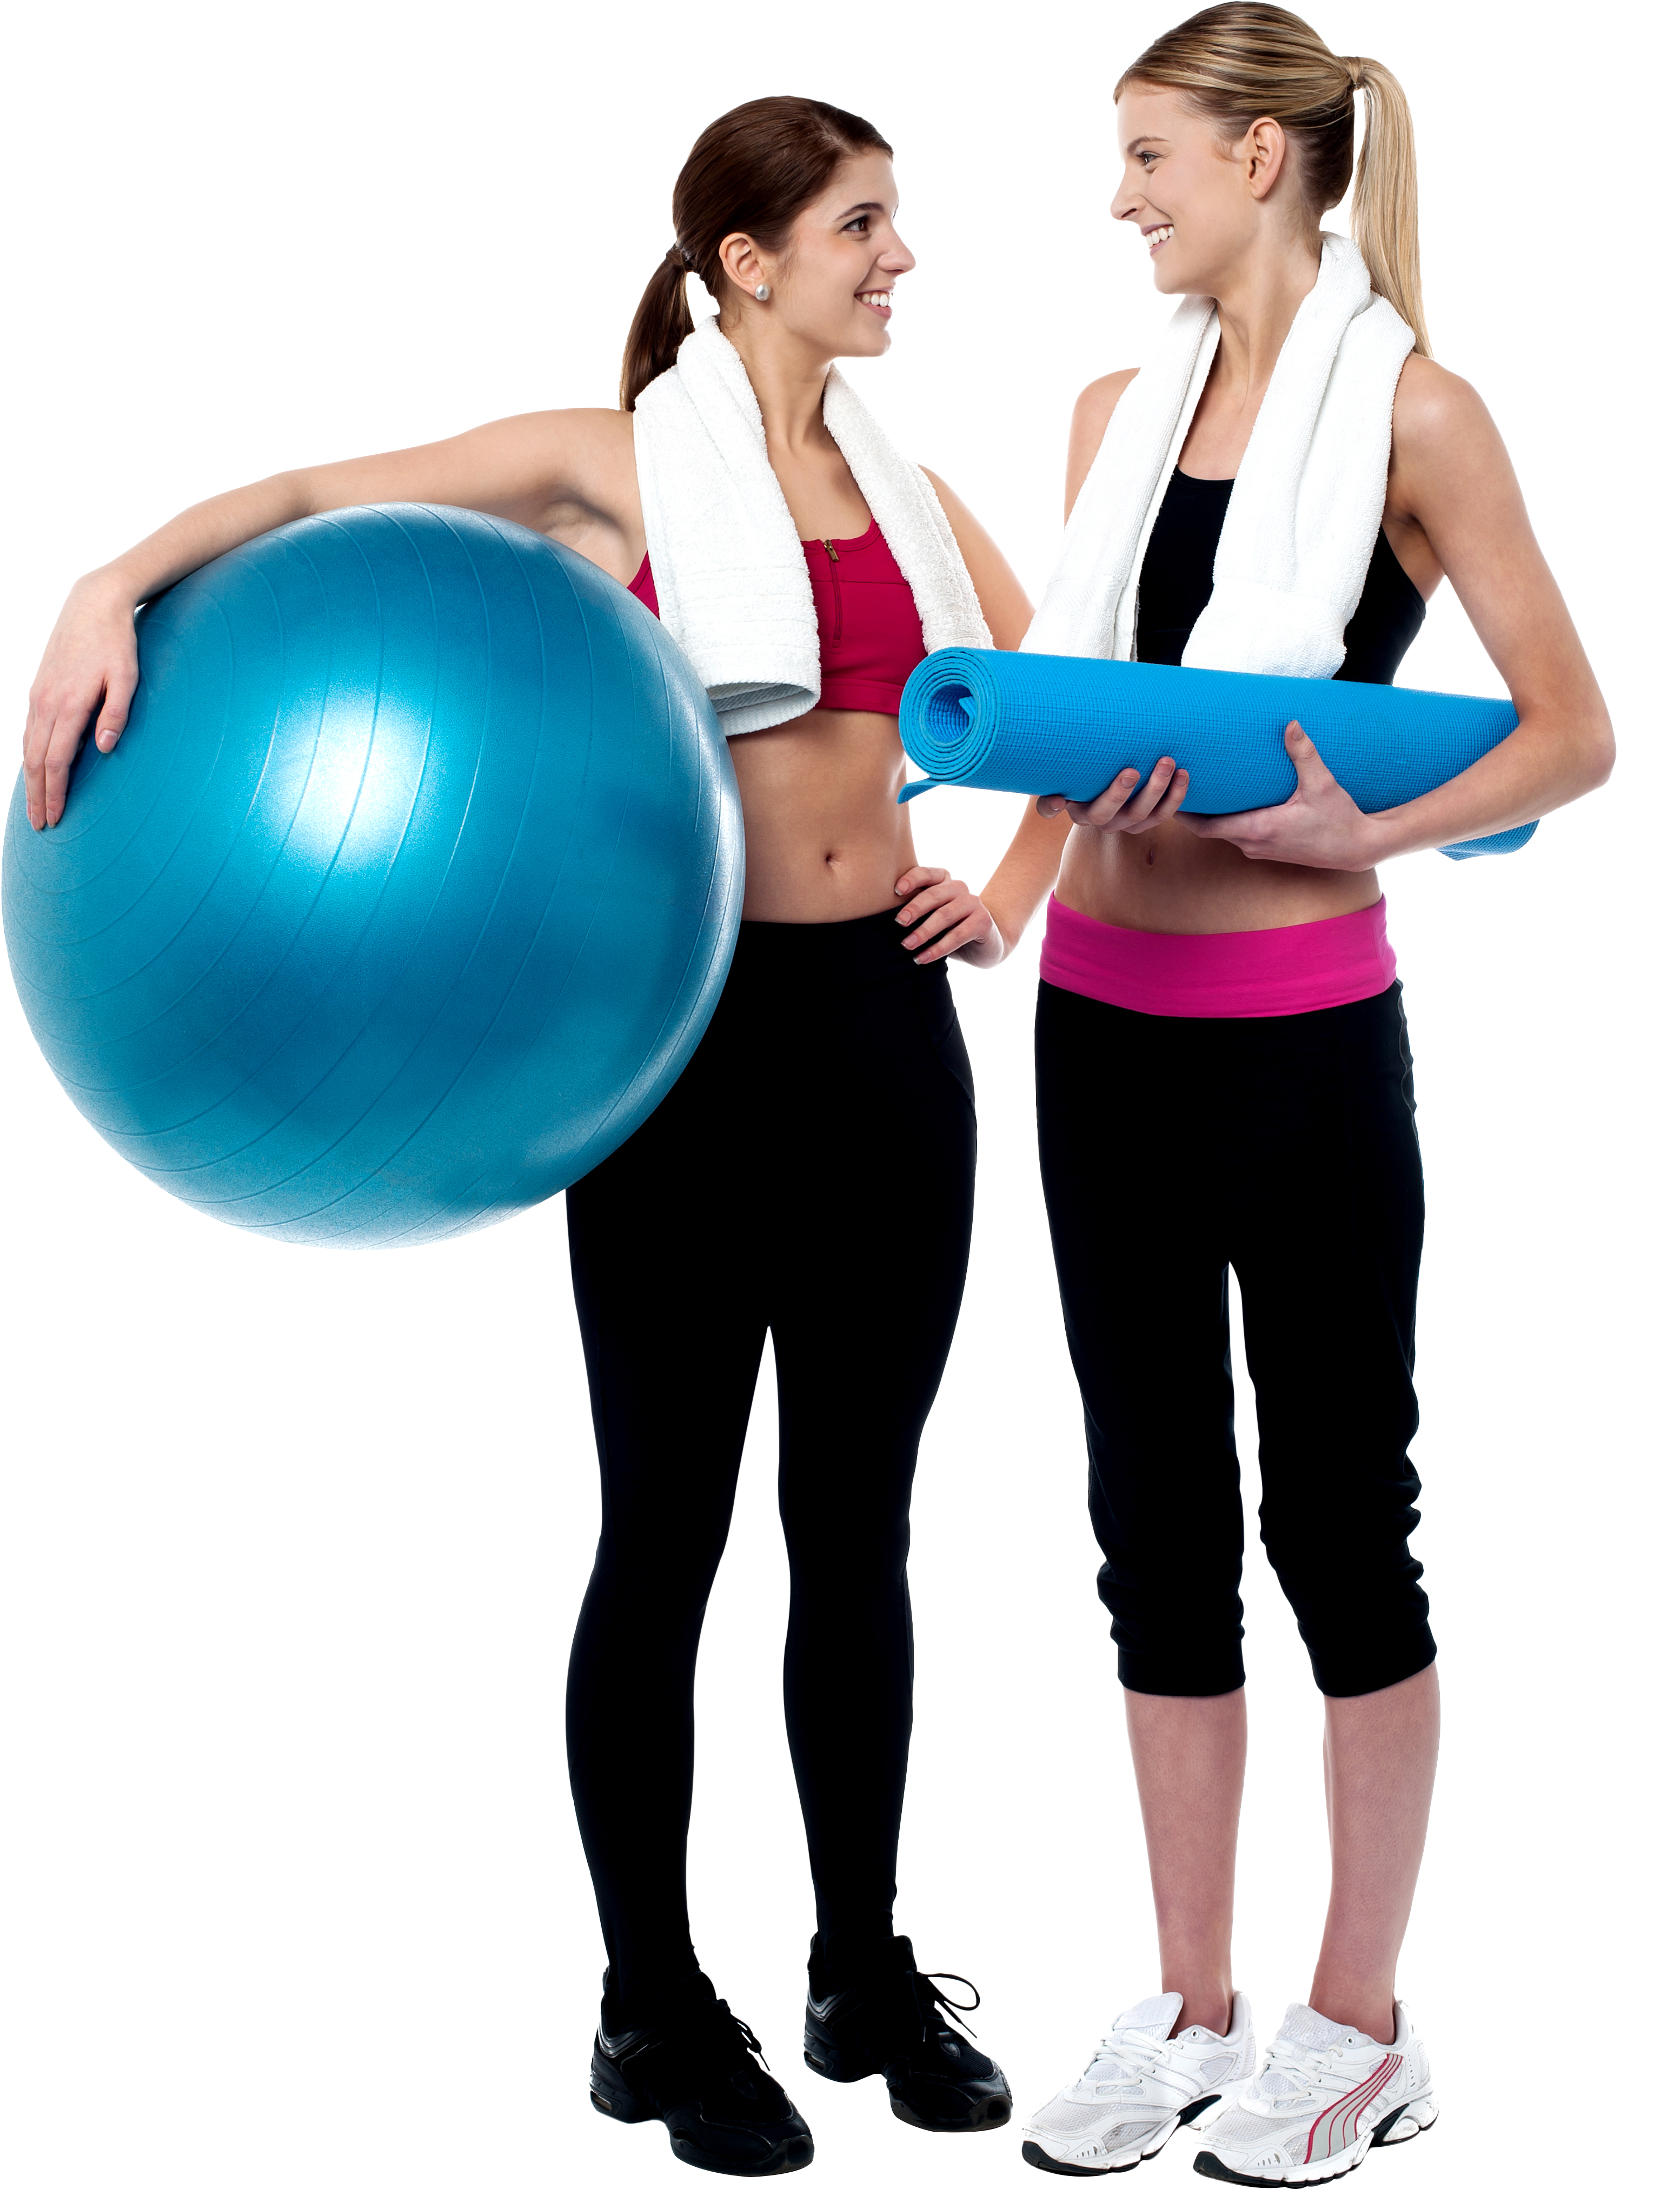 Transparent People Exercising Clipart - People Working Out Transparent Background, Hd Png Download